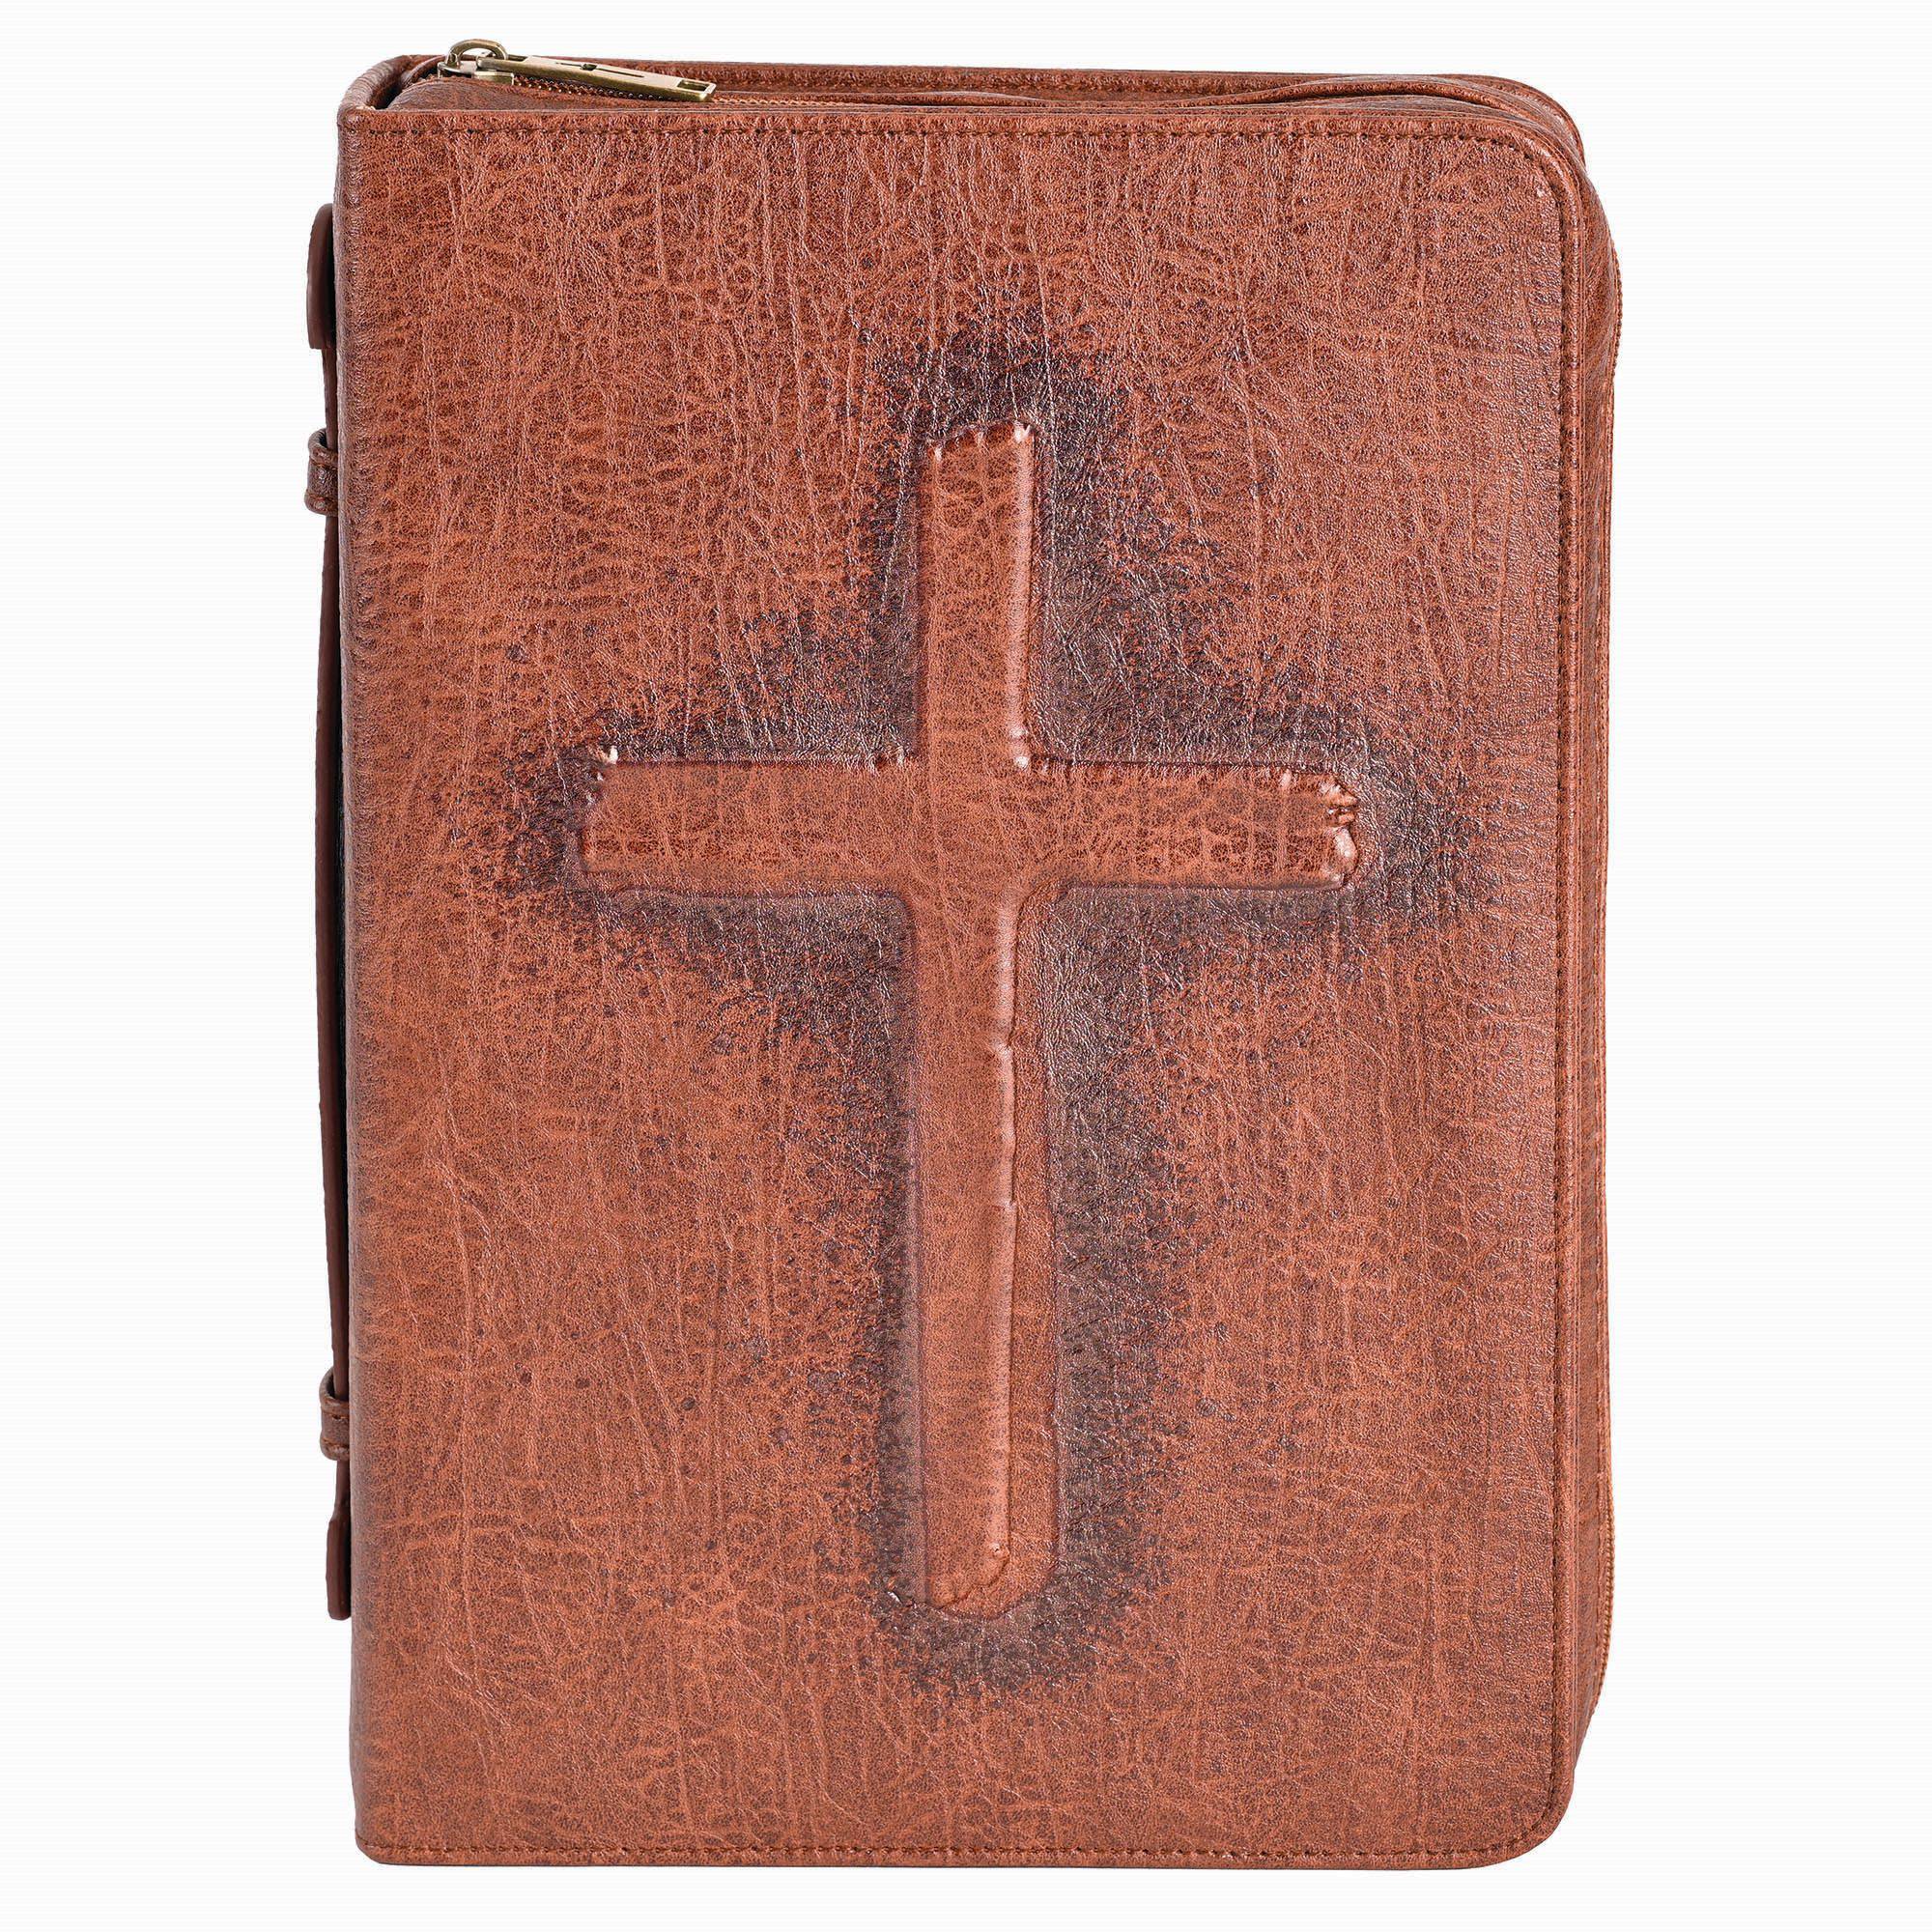 White Dove Designs Bible Cover-Wedge Shape-Faith Collection Cross &  Heart-Large-Brown (Jan) : Office Products 